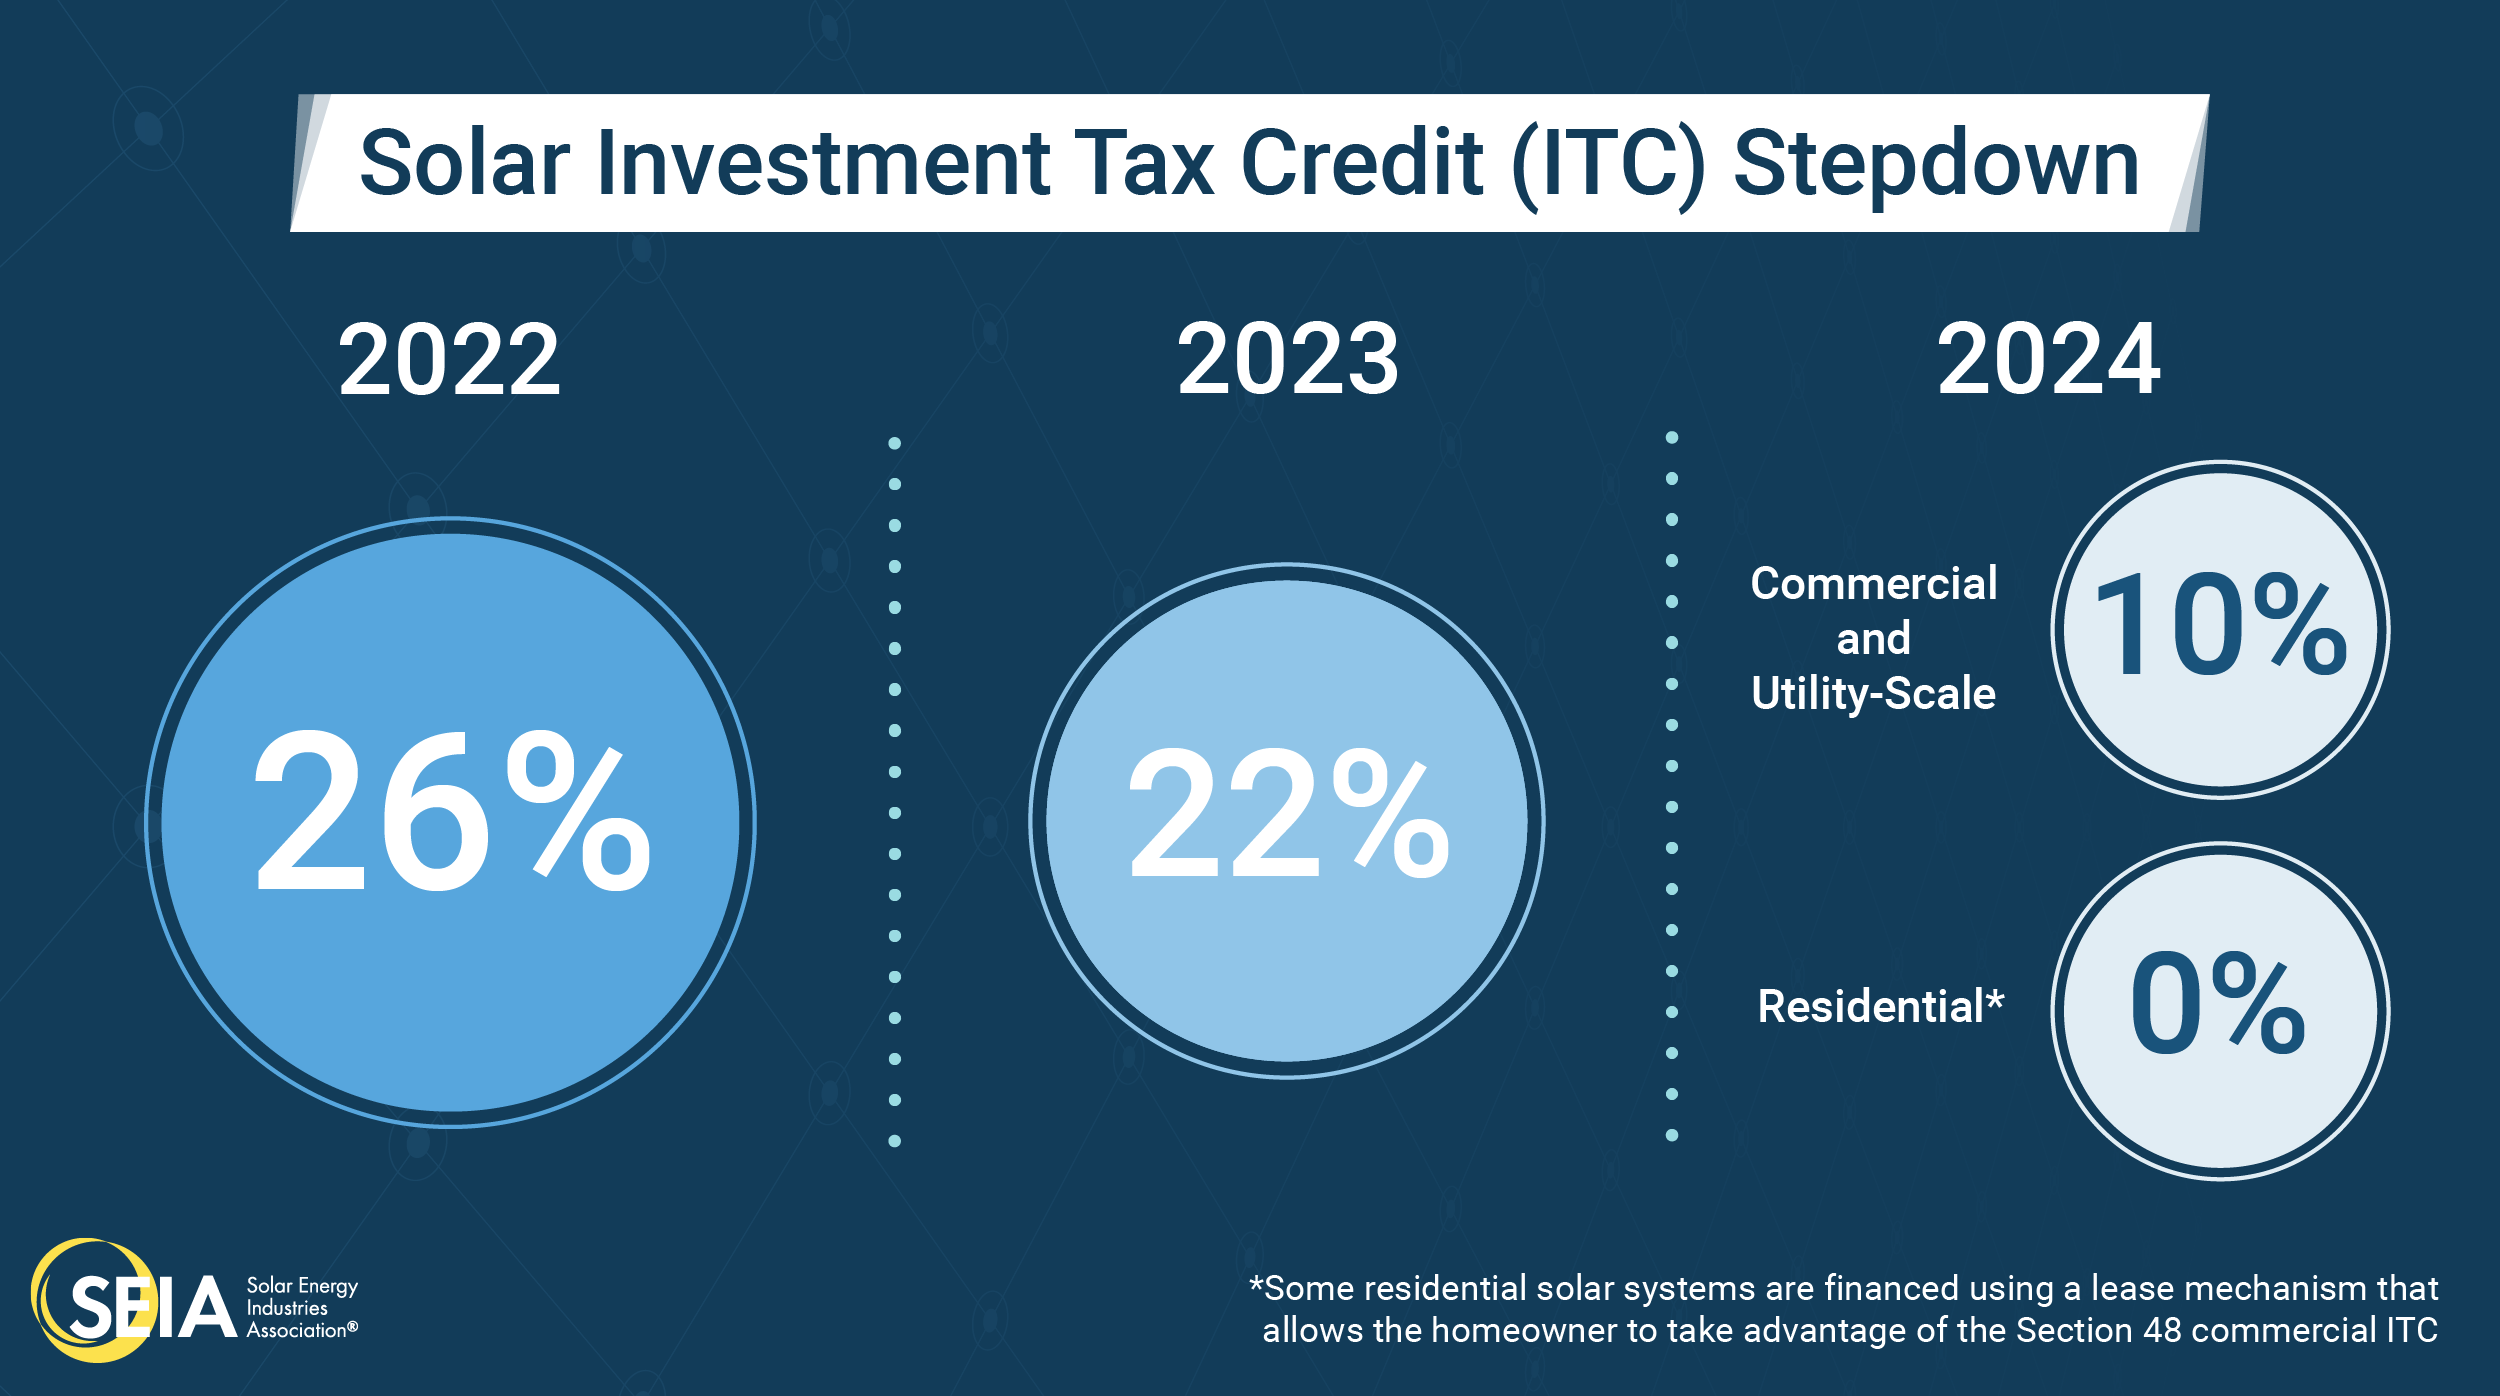 This image shows that going solar in 2022 helps homeowners take advantage of the 26% federal tax credit before it drops to 22%.